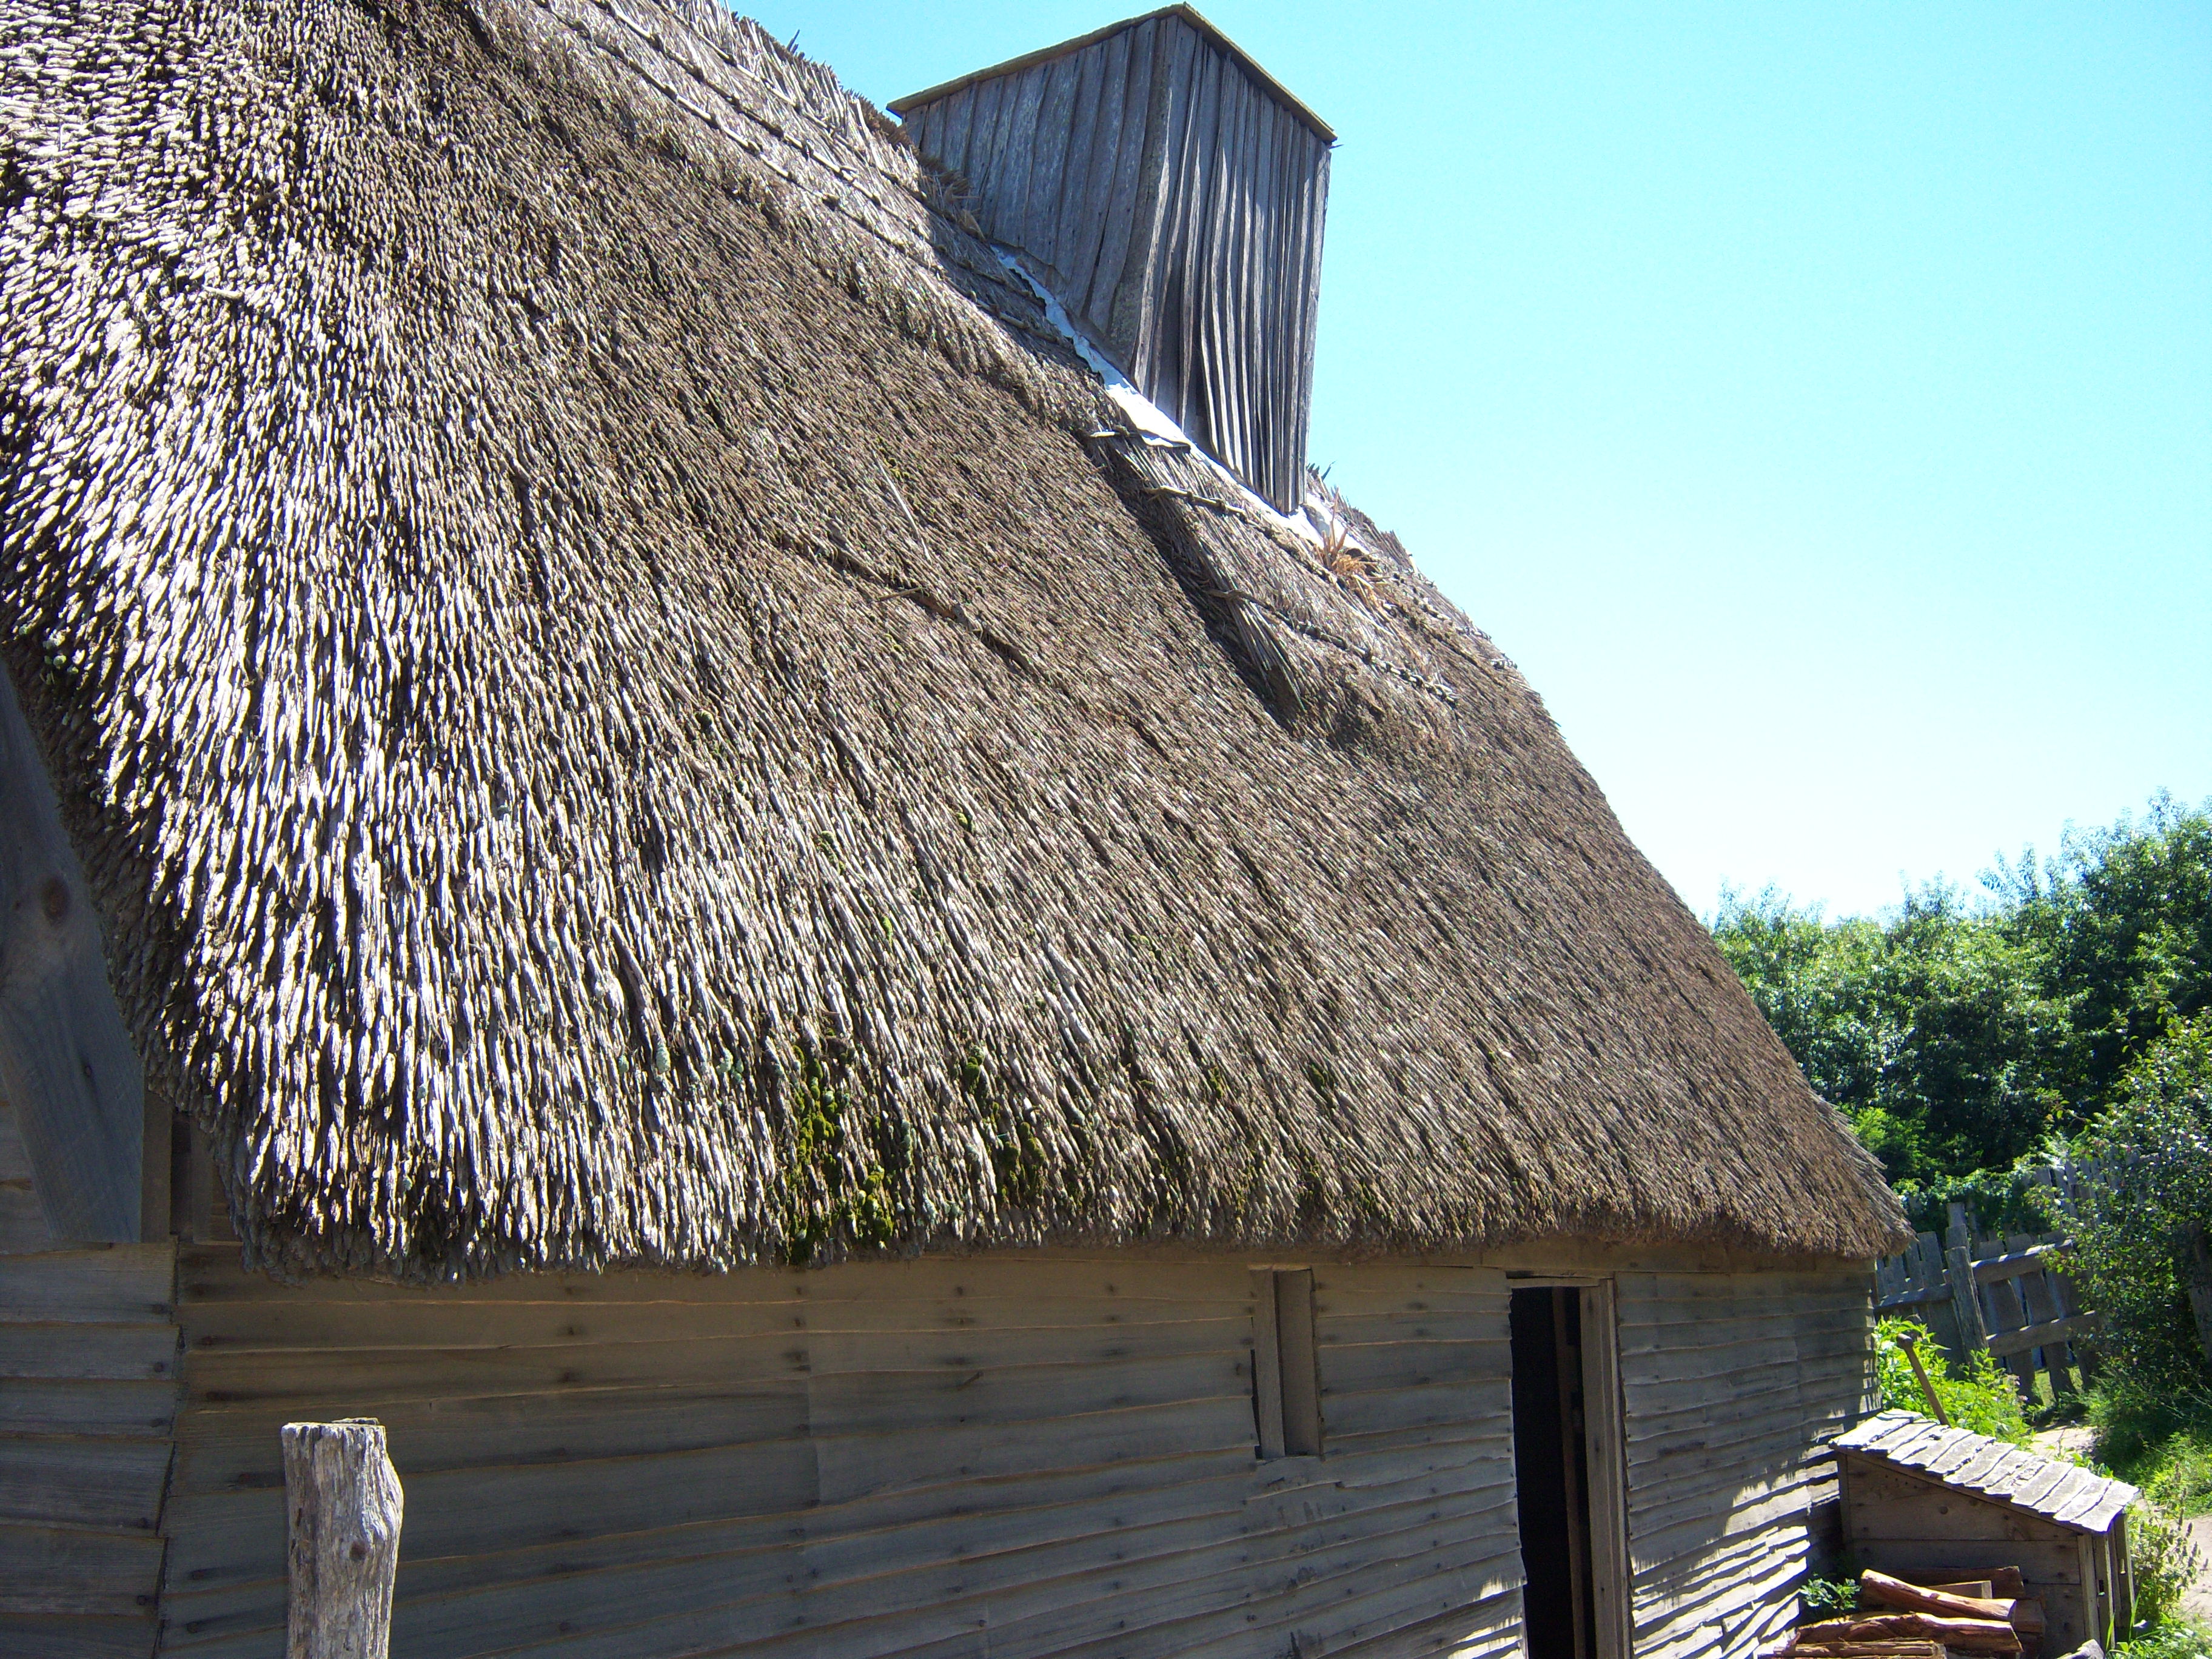 Thatched roof for real